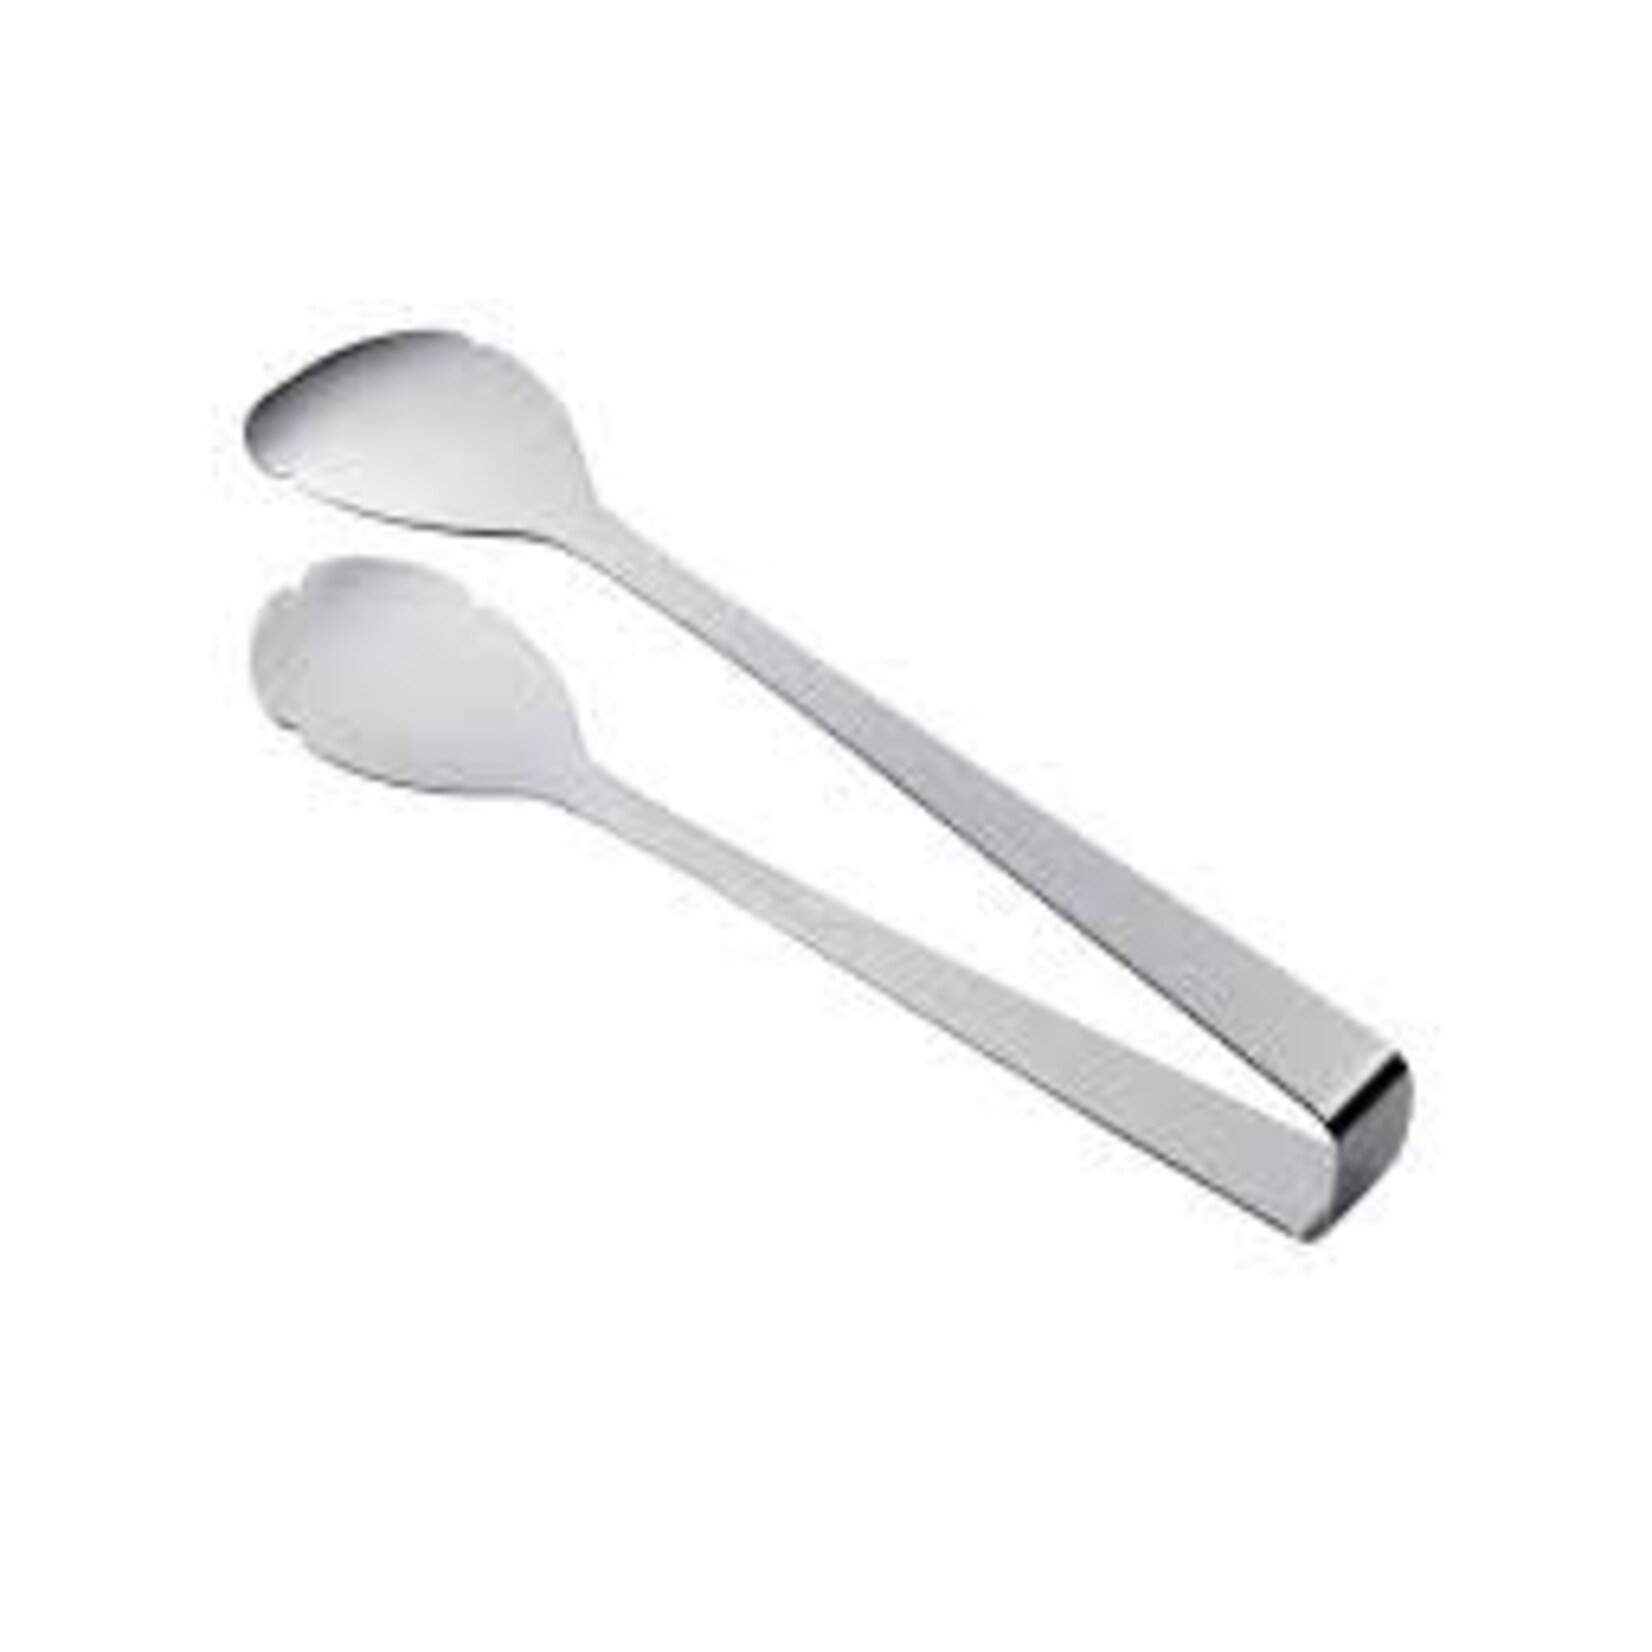 Corby Hall KS0046 Corby Oslo  6" serving tong 6/case